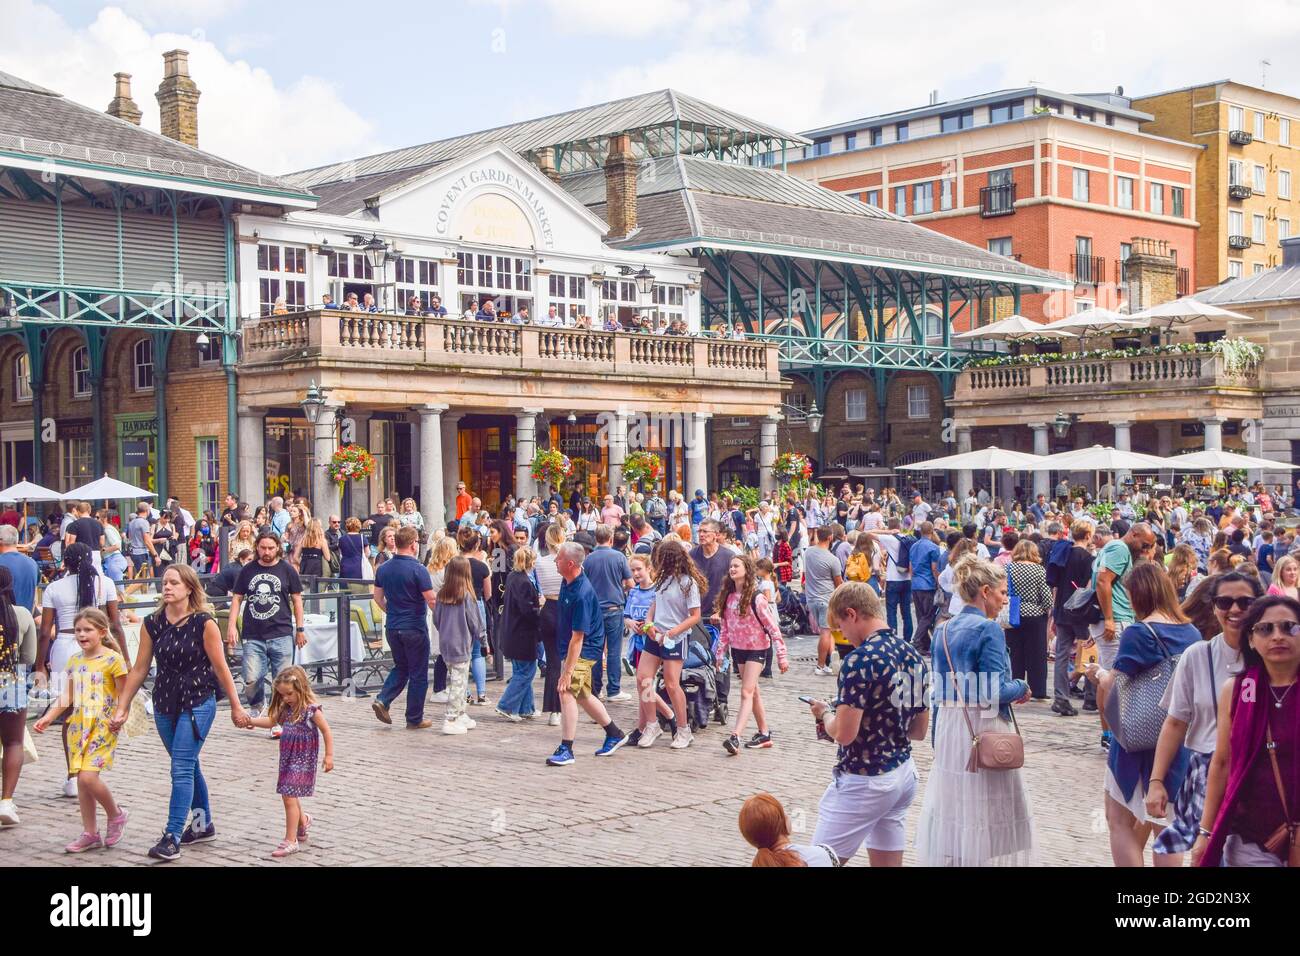 London, United Kingdom. 10th August 2021. Crowds in Covent Garden. London landmarks have been busy again, as tourists return to the capital following the relaxation of coronavirus restrictions and quarantine rules in England over the past few weeks. (Credit: Vuk Valcic / Alamy Live News) Stock Photo